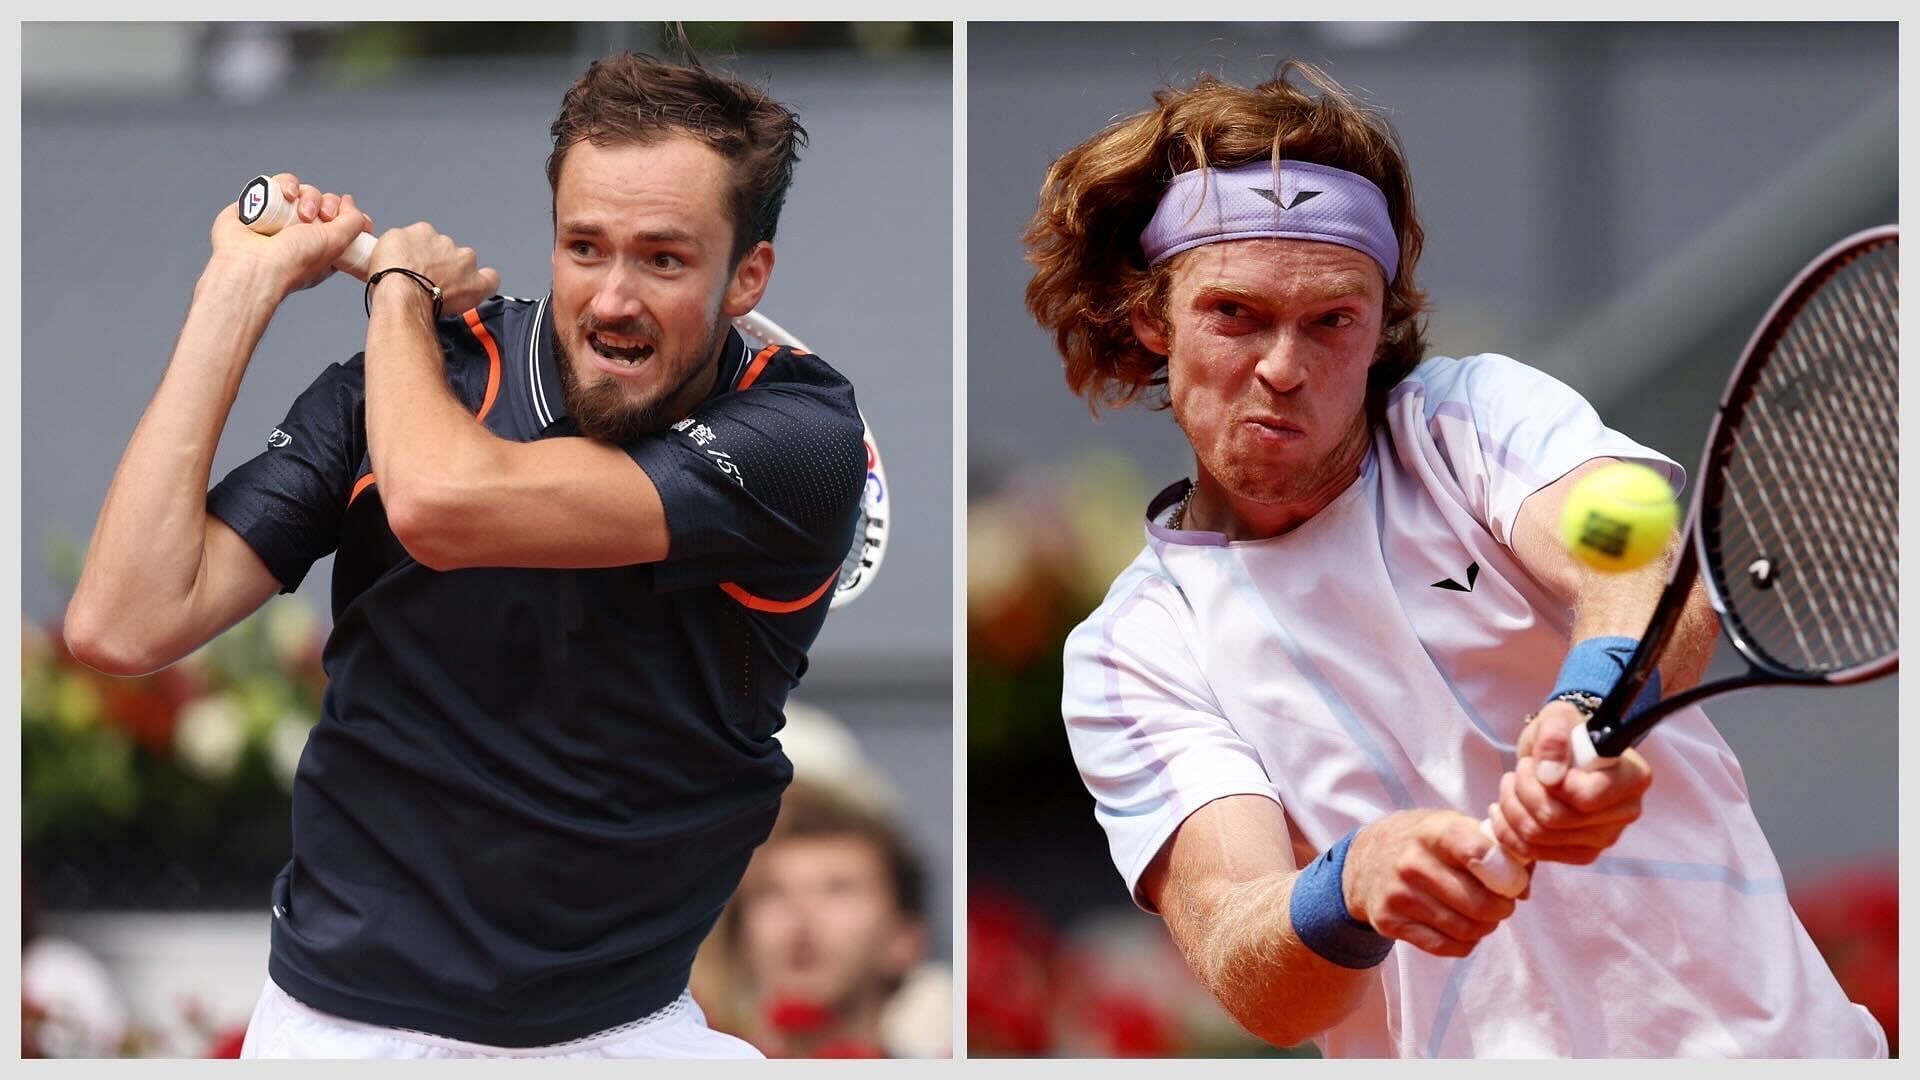 Daniil Medvedev vs Andrey Rublev is one of the quarterfinal matches at the 2023 US Open.